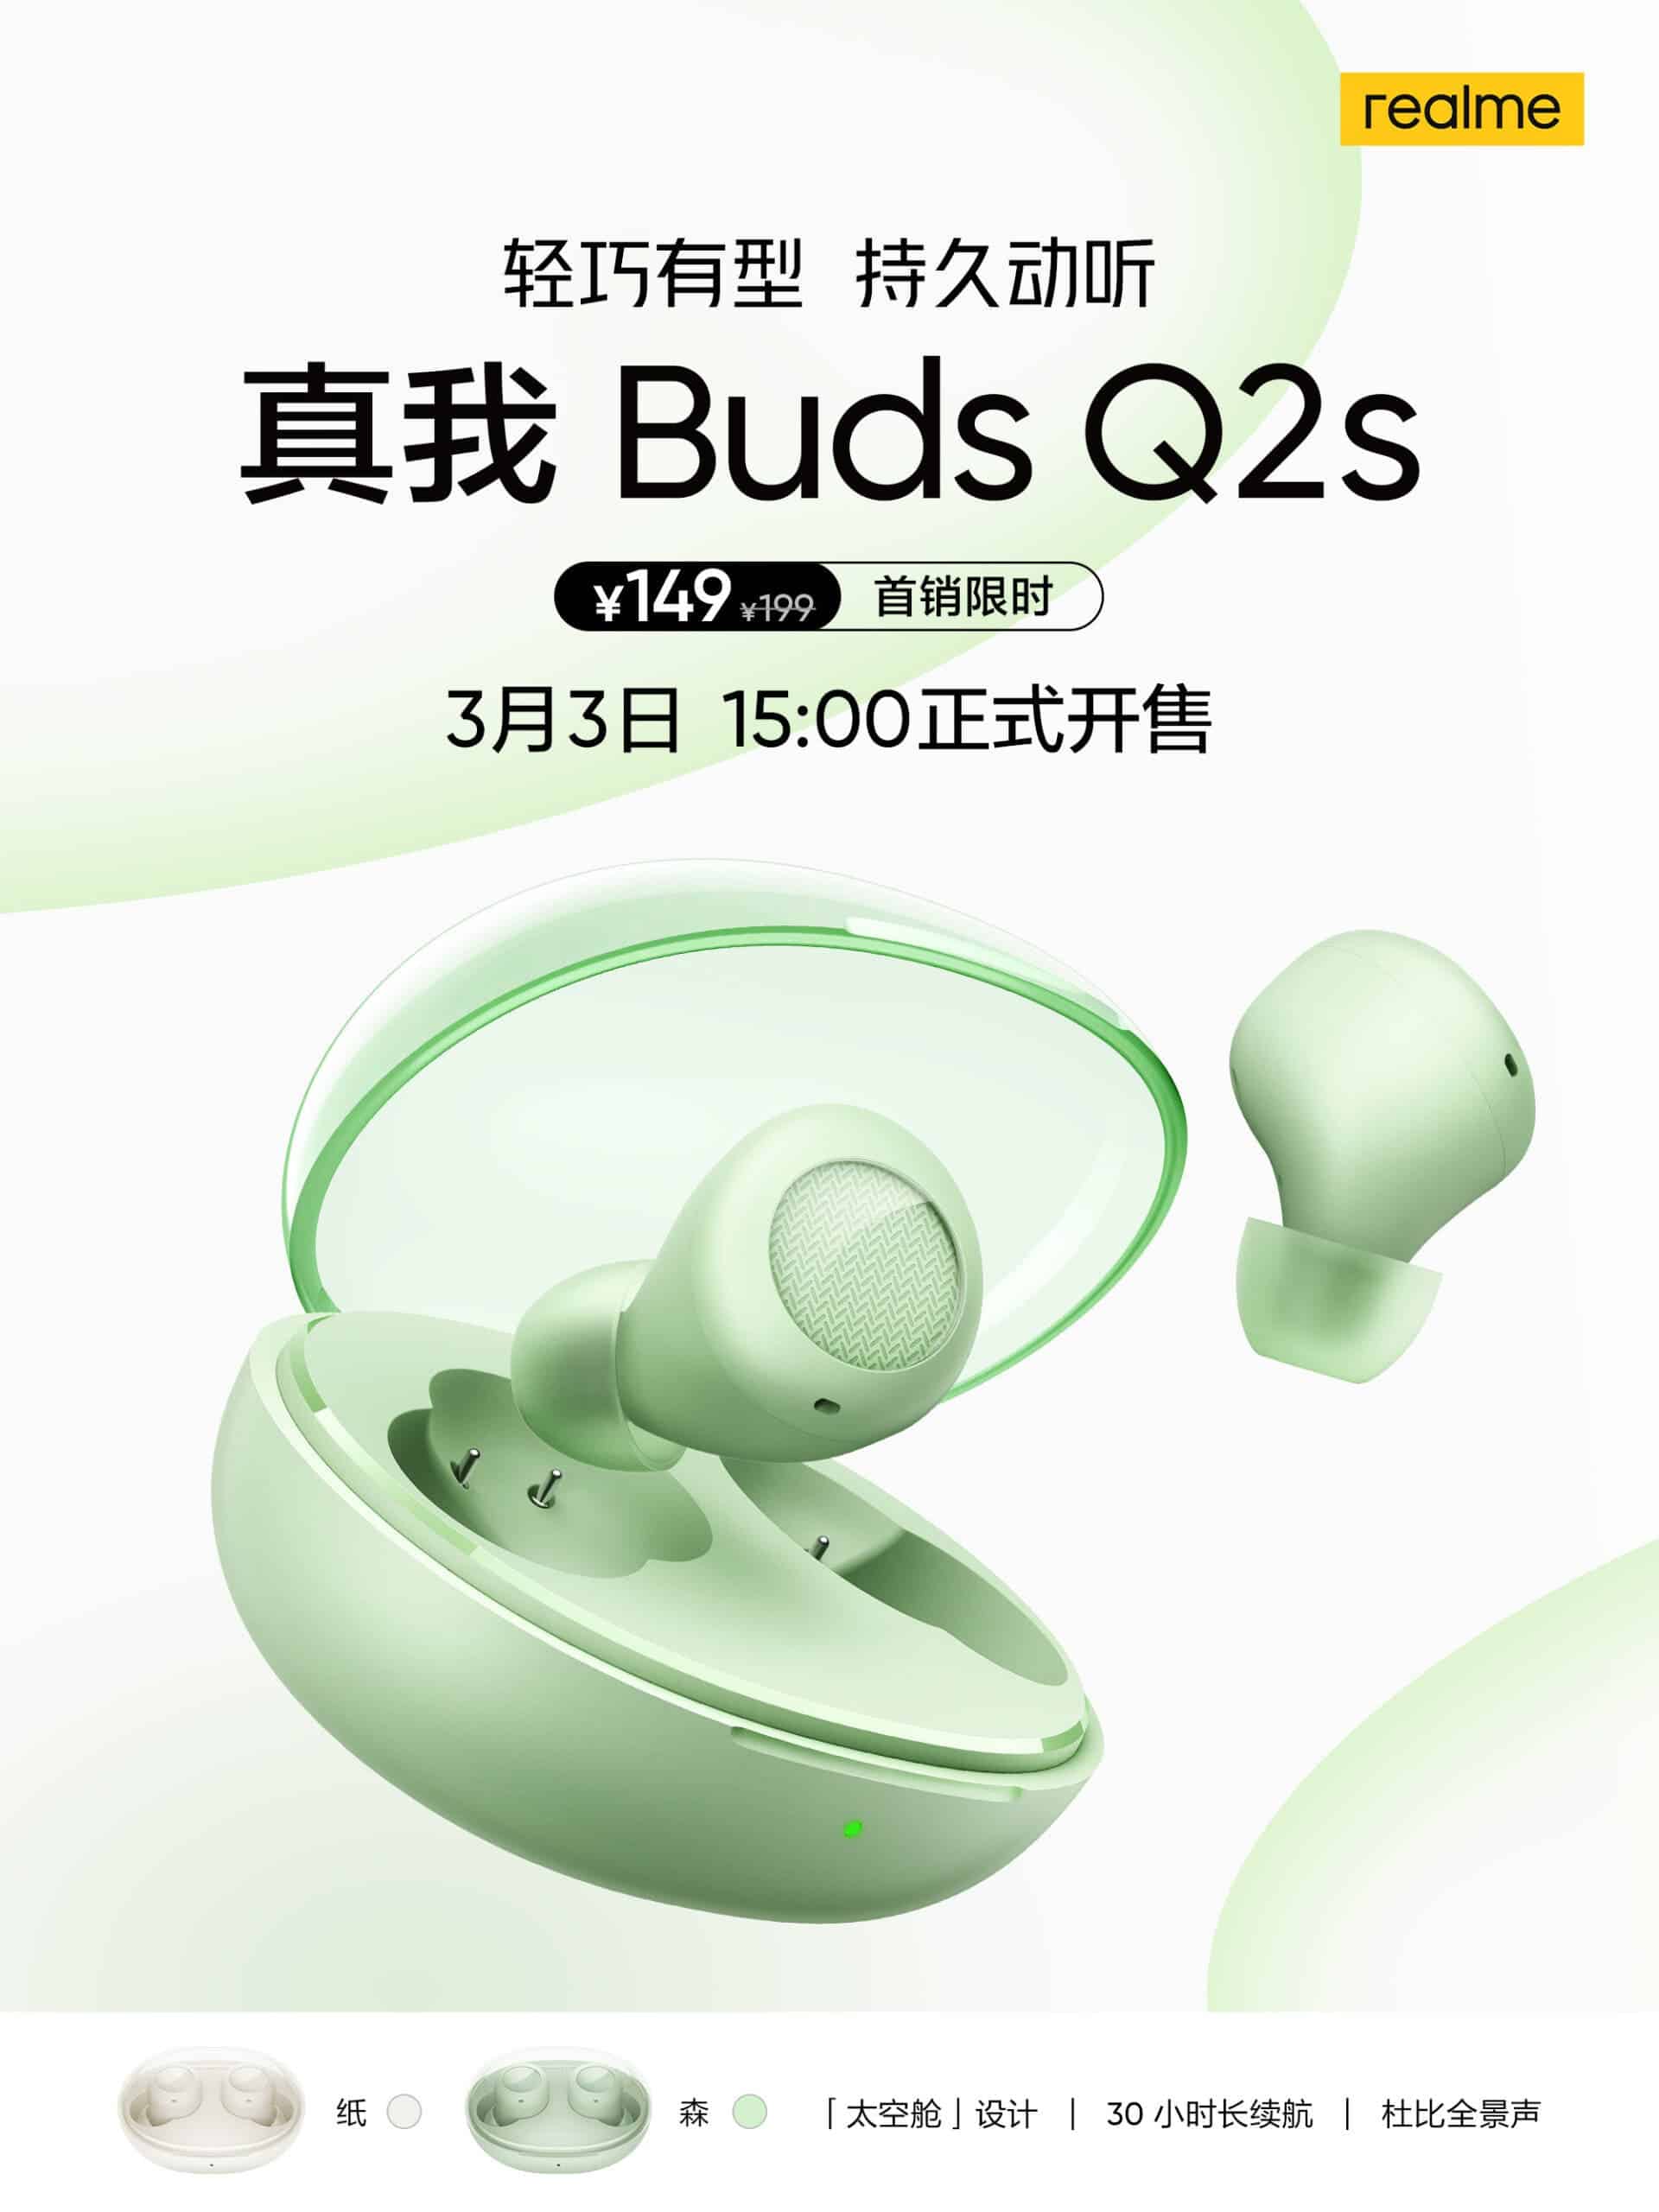 Realme Buds Q2s launch